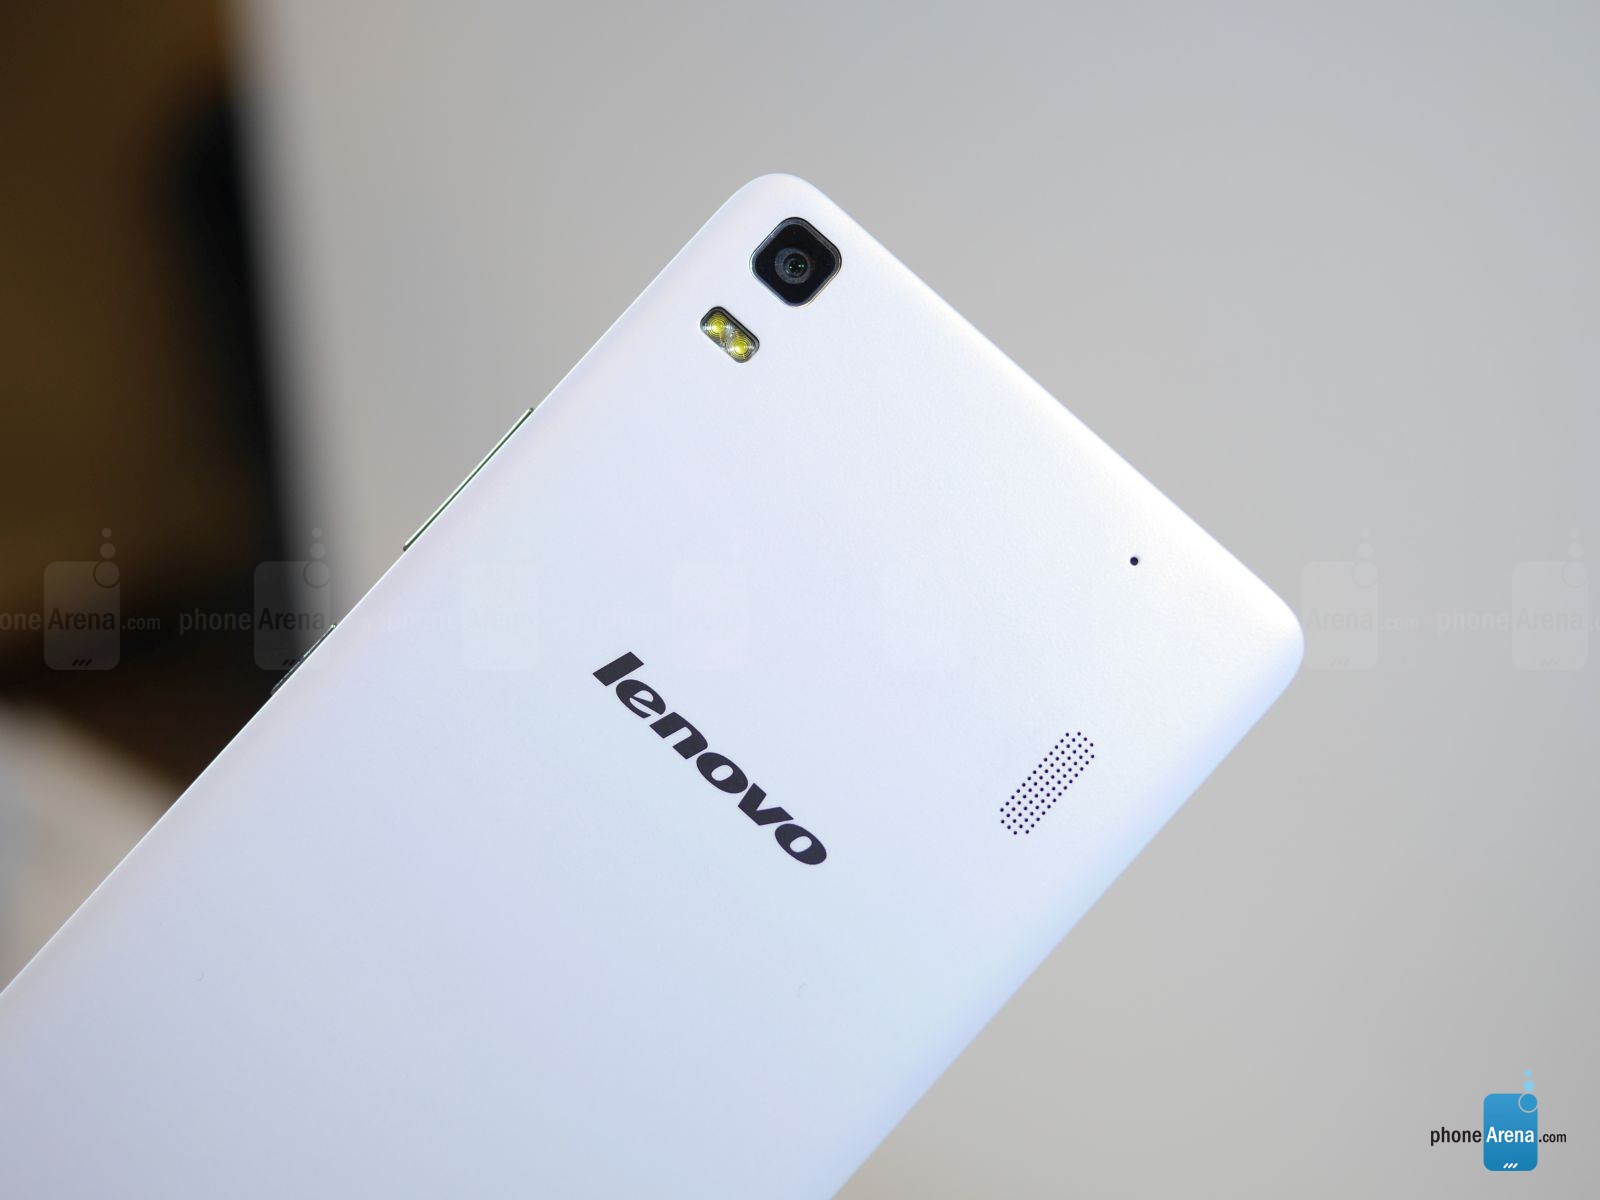 hd wallpapers for lenovo a7000,mobile phone,gadget,communication device,smartphone,white